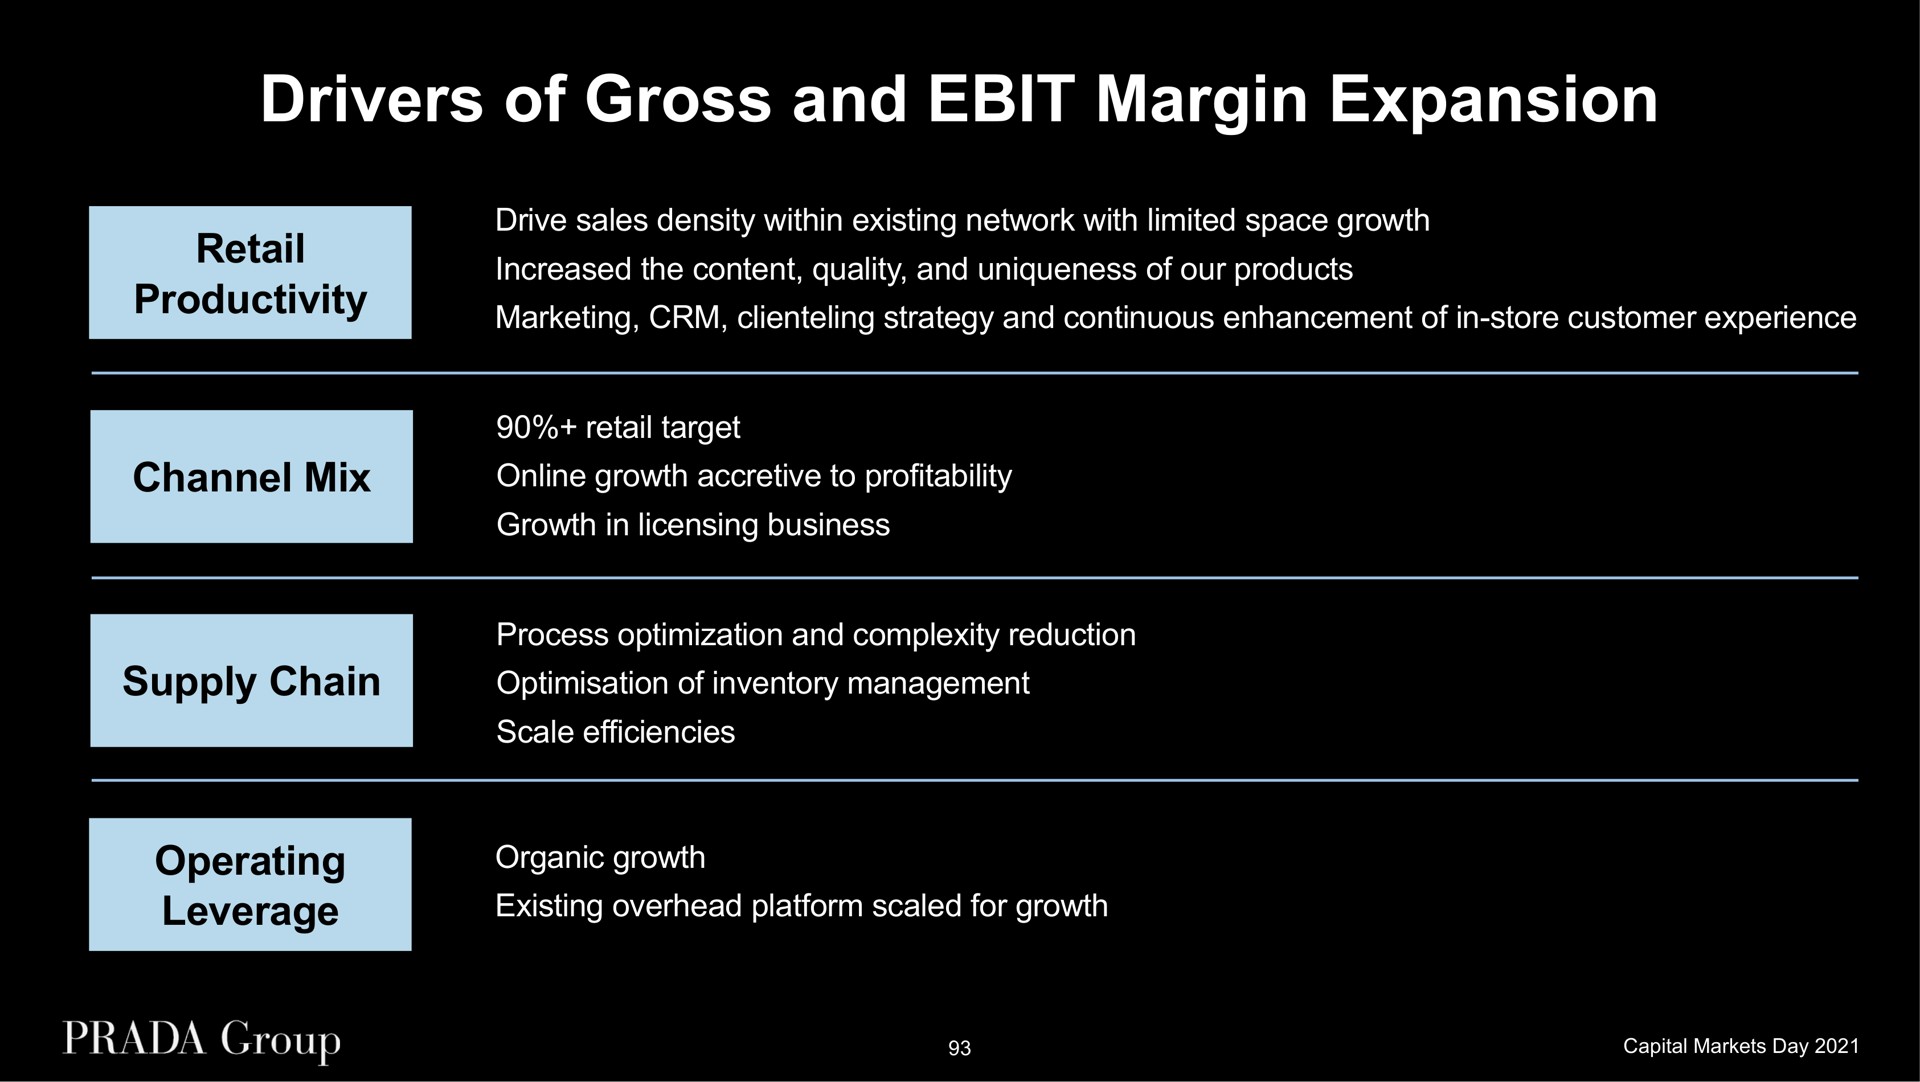 drivers of gross and margin expansion retail productivity drive sales density within existing network with limited space growth increased the content quality and uniqueness of our products marketing strategy and continuous enhancement of in store customer experience retail target channel mix growth accretive to profitability growth in licensing business supply chain of inventory management process optimization and complexity reduction scale efficiencies operating leverage organic growth existing overhead platform scaled for growth | Prada